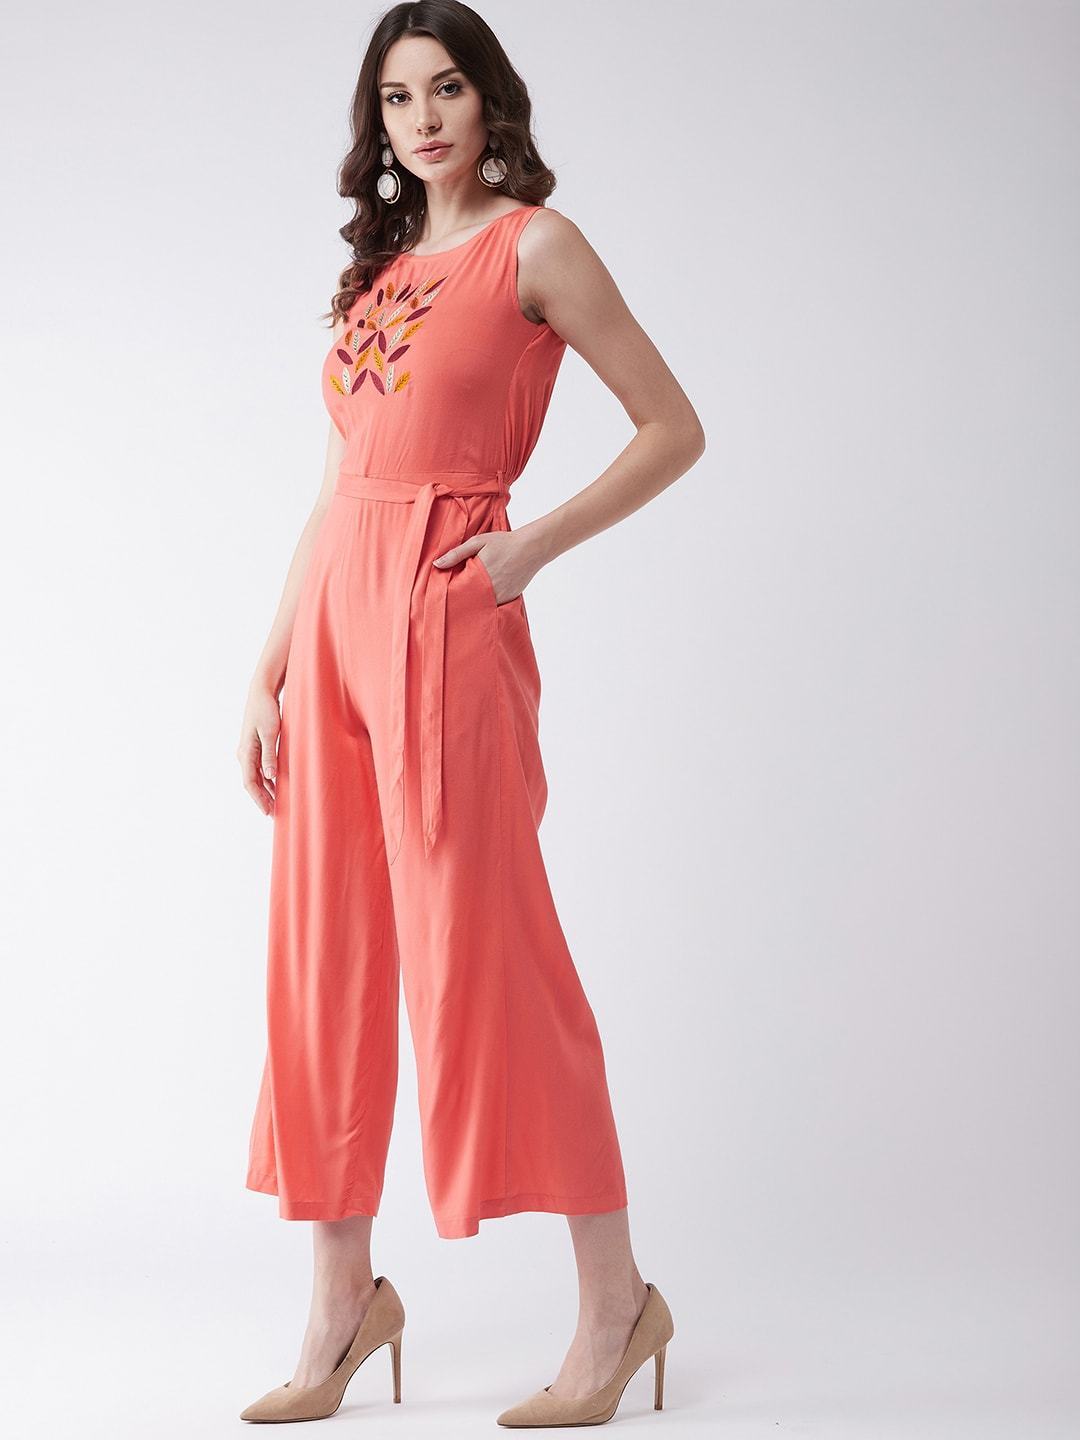 Women's Coral Embroidered Sleeveless Jumpsuit - Pannkh